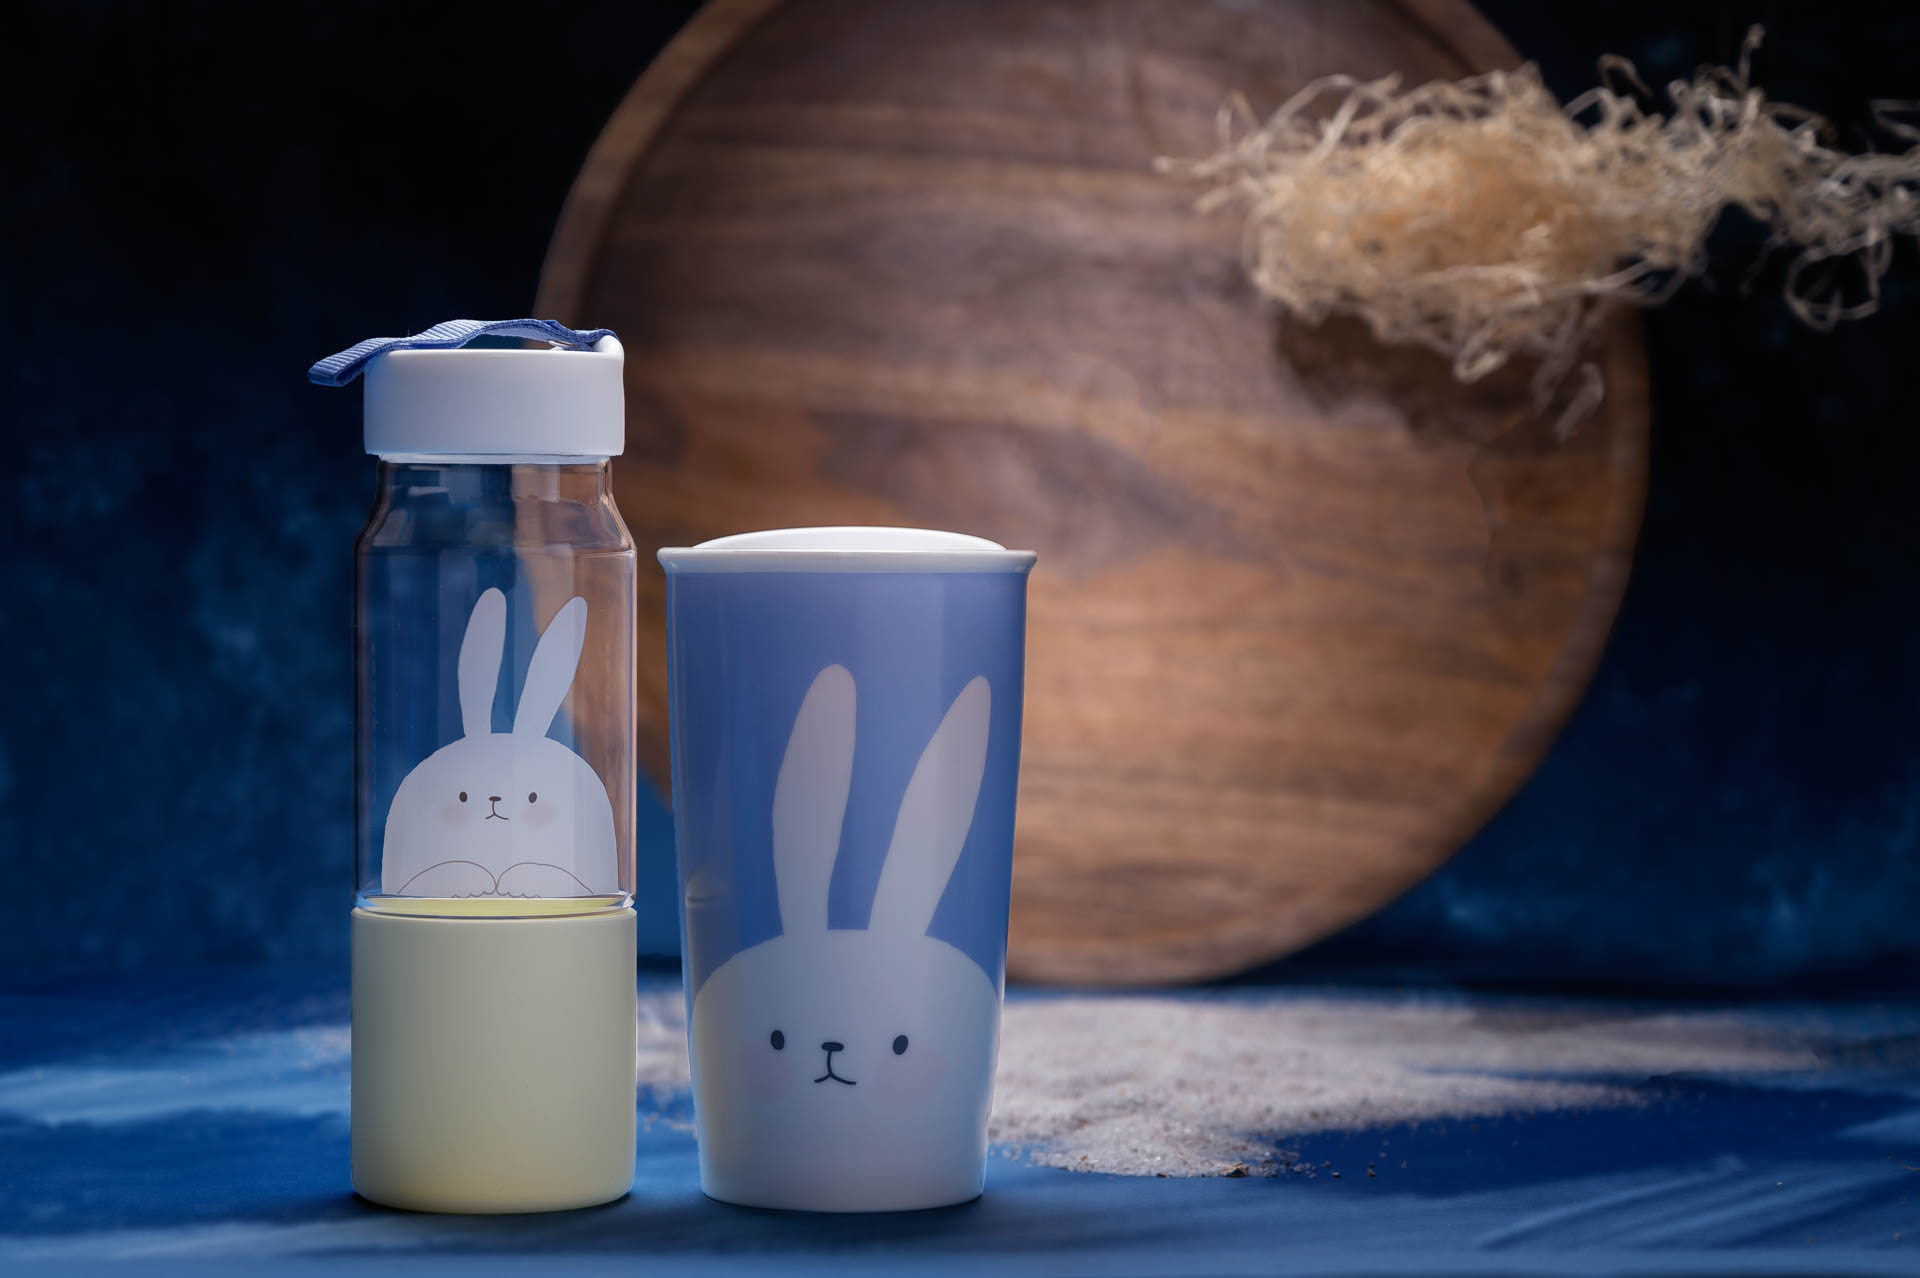 Starbucks 2020 Mid-Autumn Festival Blue Thermos Bunny Baby Cup Bottle